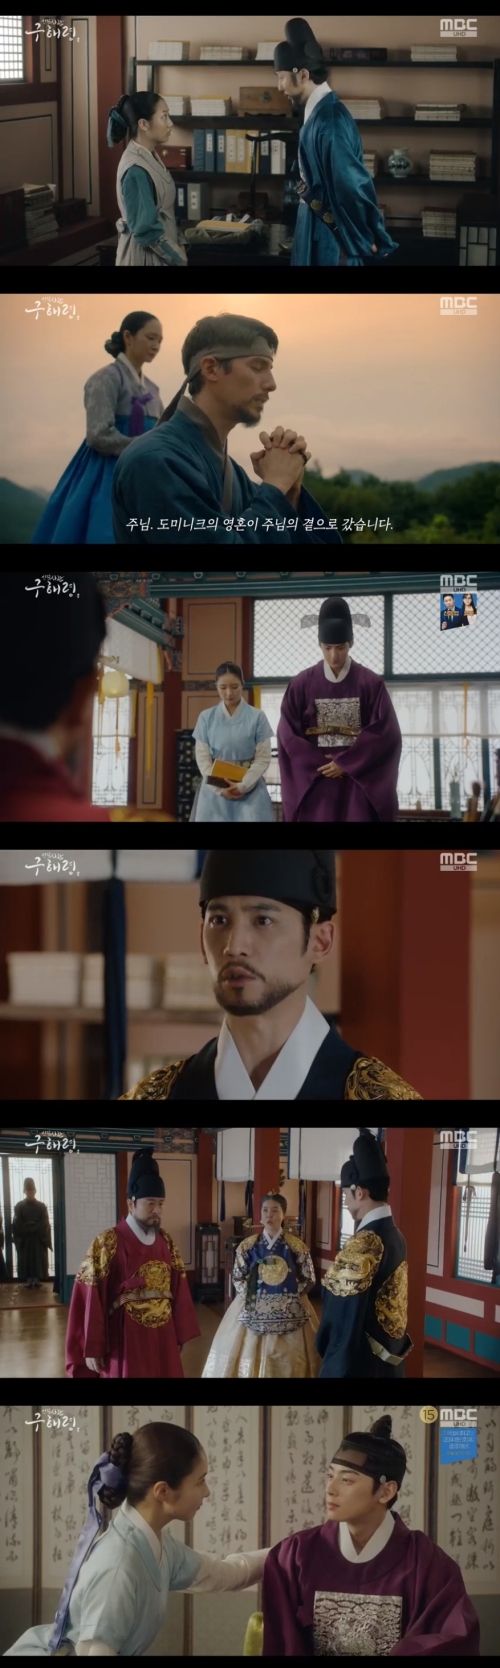 New officer Rookie Historian Goo Hae-ryung was hit by another DDanger as soon as DDanger helped the Western OrDanger.In the 27th and 28th MBC drama The New Entrepreneur Rookie Historian Goo Hae-ryung broadcast on the 29th, Rookie Historian Goo Hae-ryung and Lee Lim (Cha Eun-woo) were placed in DDanger while helping Western orDangers.On this day, Mohwa (Jeon Ik-ryong) knew the identity of Rookie Historian Goo Hae-ryung by meeting with Fair Exchange.Koo was not the biological sister of Rookie Historian Goo Hae-ryung, but the biological daughter of Lean on Me who taught Koo Jae-kyung and Mohwa.Rookie Historian Goo Hae-ryungs father told the mother who had been a thousand years old as a vulgar slave in the past, You have a lot of things no matter how you were born.So please be a precious person by my side. He reached out and helped me to study medicine in Seoraewon.Mohwa was born as a talented person by studying with the Fair exchange that he met in Seoraewon.Mohwa ran to Lean on Me to convey her joy after completing her first surgery safely in front of a Western doctor.And I met and laughed with young Rookie Historian Goo Hae-ryung.Since then, the mother has been overwhelmed by the appearance of the young Rookie Historian Goo Hae-ryung and the smiling appearance of the eldest Rookie Historian Goo Hae-ryung.It was because he realized that Rookie Historian Goo Hae-ryungs father and his Lean on Me died unhonorably.Among them, the western orangka hid himself in the place of Irim.As Irim and Rookie Historian Goo Hae-ryung, Husambo (Sungjiru) and Nine were approaching, the gold armies began to stand guard to the royal residence.It was a dDangerous situation that could not hide anymore.Rookie Historian Goo Hae-ryung actively utilized the tactics learned in the book, saying, Only the gold can be made to step out of the palace.He claimed to have seen the Western Orangka in the wrong place with the Nines and the Husambo, raised the rumor, and while the goldsmiths were investigating the city,So, he left the letter I am sorry to go like this by defeating Rookie Historian Goo Hae-ryung to help to the end.He said he did not come to find Kim, but came to see his brother who died in Joseon. He said he did not have to hurt Rookie Historian Goo Hae-ryung and Lee Rim.He also expressed his gratitude and disappeared.Later, he met with Mohwa outside the palace. Mohwa expressed his affection to him, saying, He resembled a lot.In the past, a Western doctor who taught medicine to Mohwa in Seoraewon and watched the first surgery was Dominic, who led him to the place where Dominic was buried and shared his sadness with him.On the other hand, Lee Tae (Kim Min-sang) gave the name to the person who hid the Western orDanger to return the sin and bring the Western orDanger.Otherwise, he added that he would punish seventy-three Catholic sinners who were caught in the palace.Lee said, I am alone, I can take responsibility alone. He was determined to overturn all the sins and headed to the king.Rookie Historian Goo Hae-ryung followed Irims lead, saying, Let me go with you.When Irim told all the facts and asked for sin, Itae resented and ordered all the Catholics to be punished and the body to be taken out of the city.But the Catholic sinners were already dismissed by the taxman Lee Jin (Park Ki-woong).Lees Danger then moved on to Lee Jin.As soon as Lee Tae was vomiting to Lee Jin, who said his choice was wrong, Im (Kim Yeo-jin) appeared and shouted, What is this, the master?Eventually, Itae turned around with his teeth clenched.Among them, it was revealed that the Bible (Ji Gun-woo) had entered the Donggungjeon and was afraid of Lee Jin.If he did not release his Catholic comrades, he said he would tell the world that Irim helped the transferees.Ahn Min-woo-won (Lee Ji-hoon) was surprised by the fact, saying, I intervened in the affairs using private books, and I did something I should not do as a military officer.Then, the Bible said that it gave up its own office and added confusion to Minwoo.Meanwhile, it was announced that the ritual was installed at the end of the play.He explained to Lee, Your Majesty ordered Mamas marriage. Lee Lim and Rookie Historian Goo Hae-ryung were confused and raised their curiosity about future development.